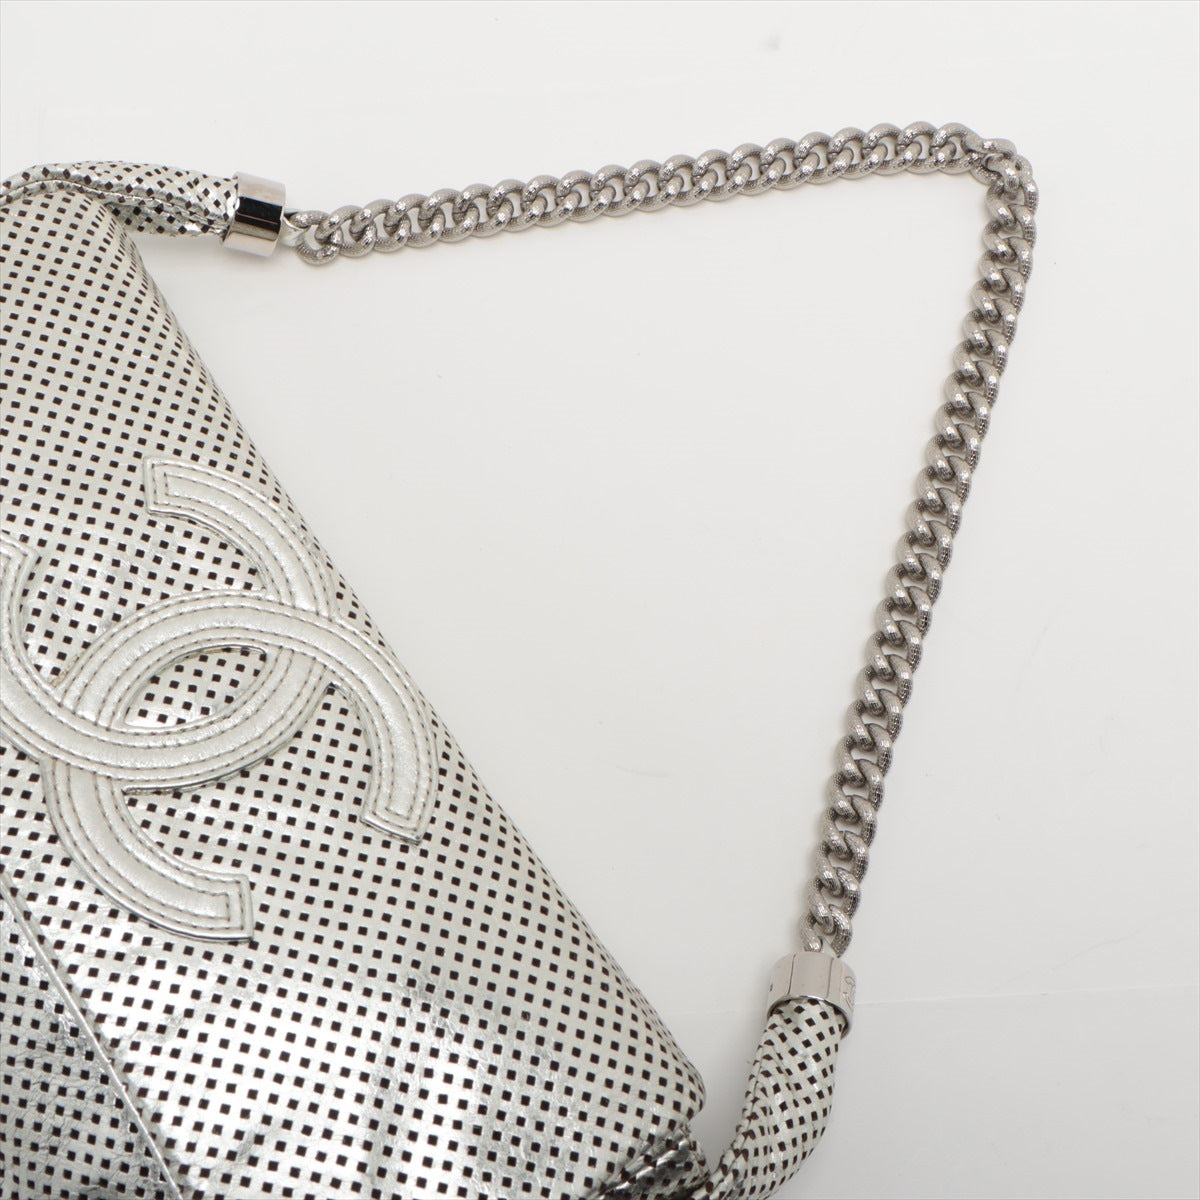 Chanel Coco Mark Punching leather Chain shoulder bag Silver Silver Metal fittings 12XXXXXX Medium dough curing